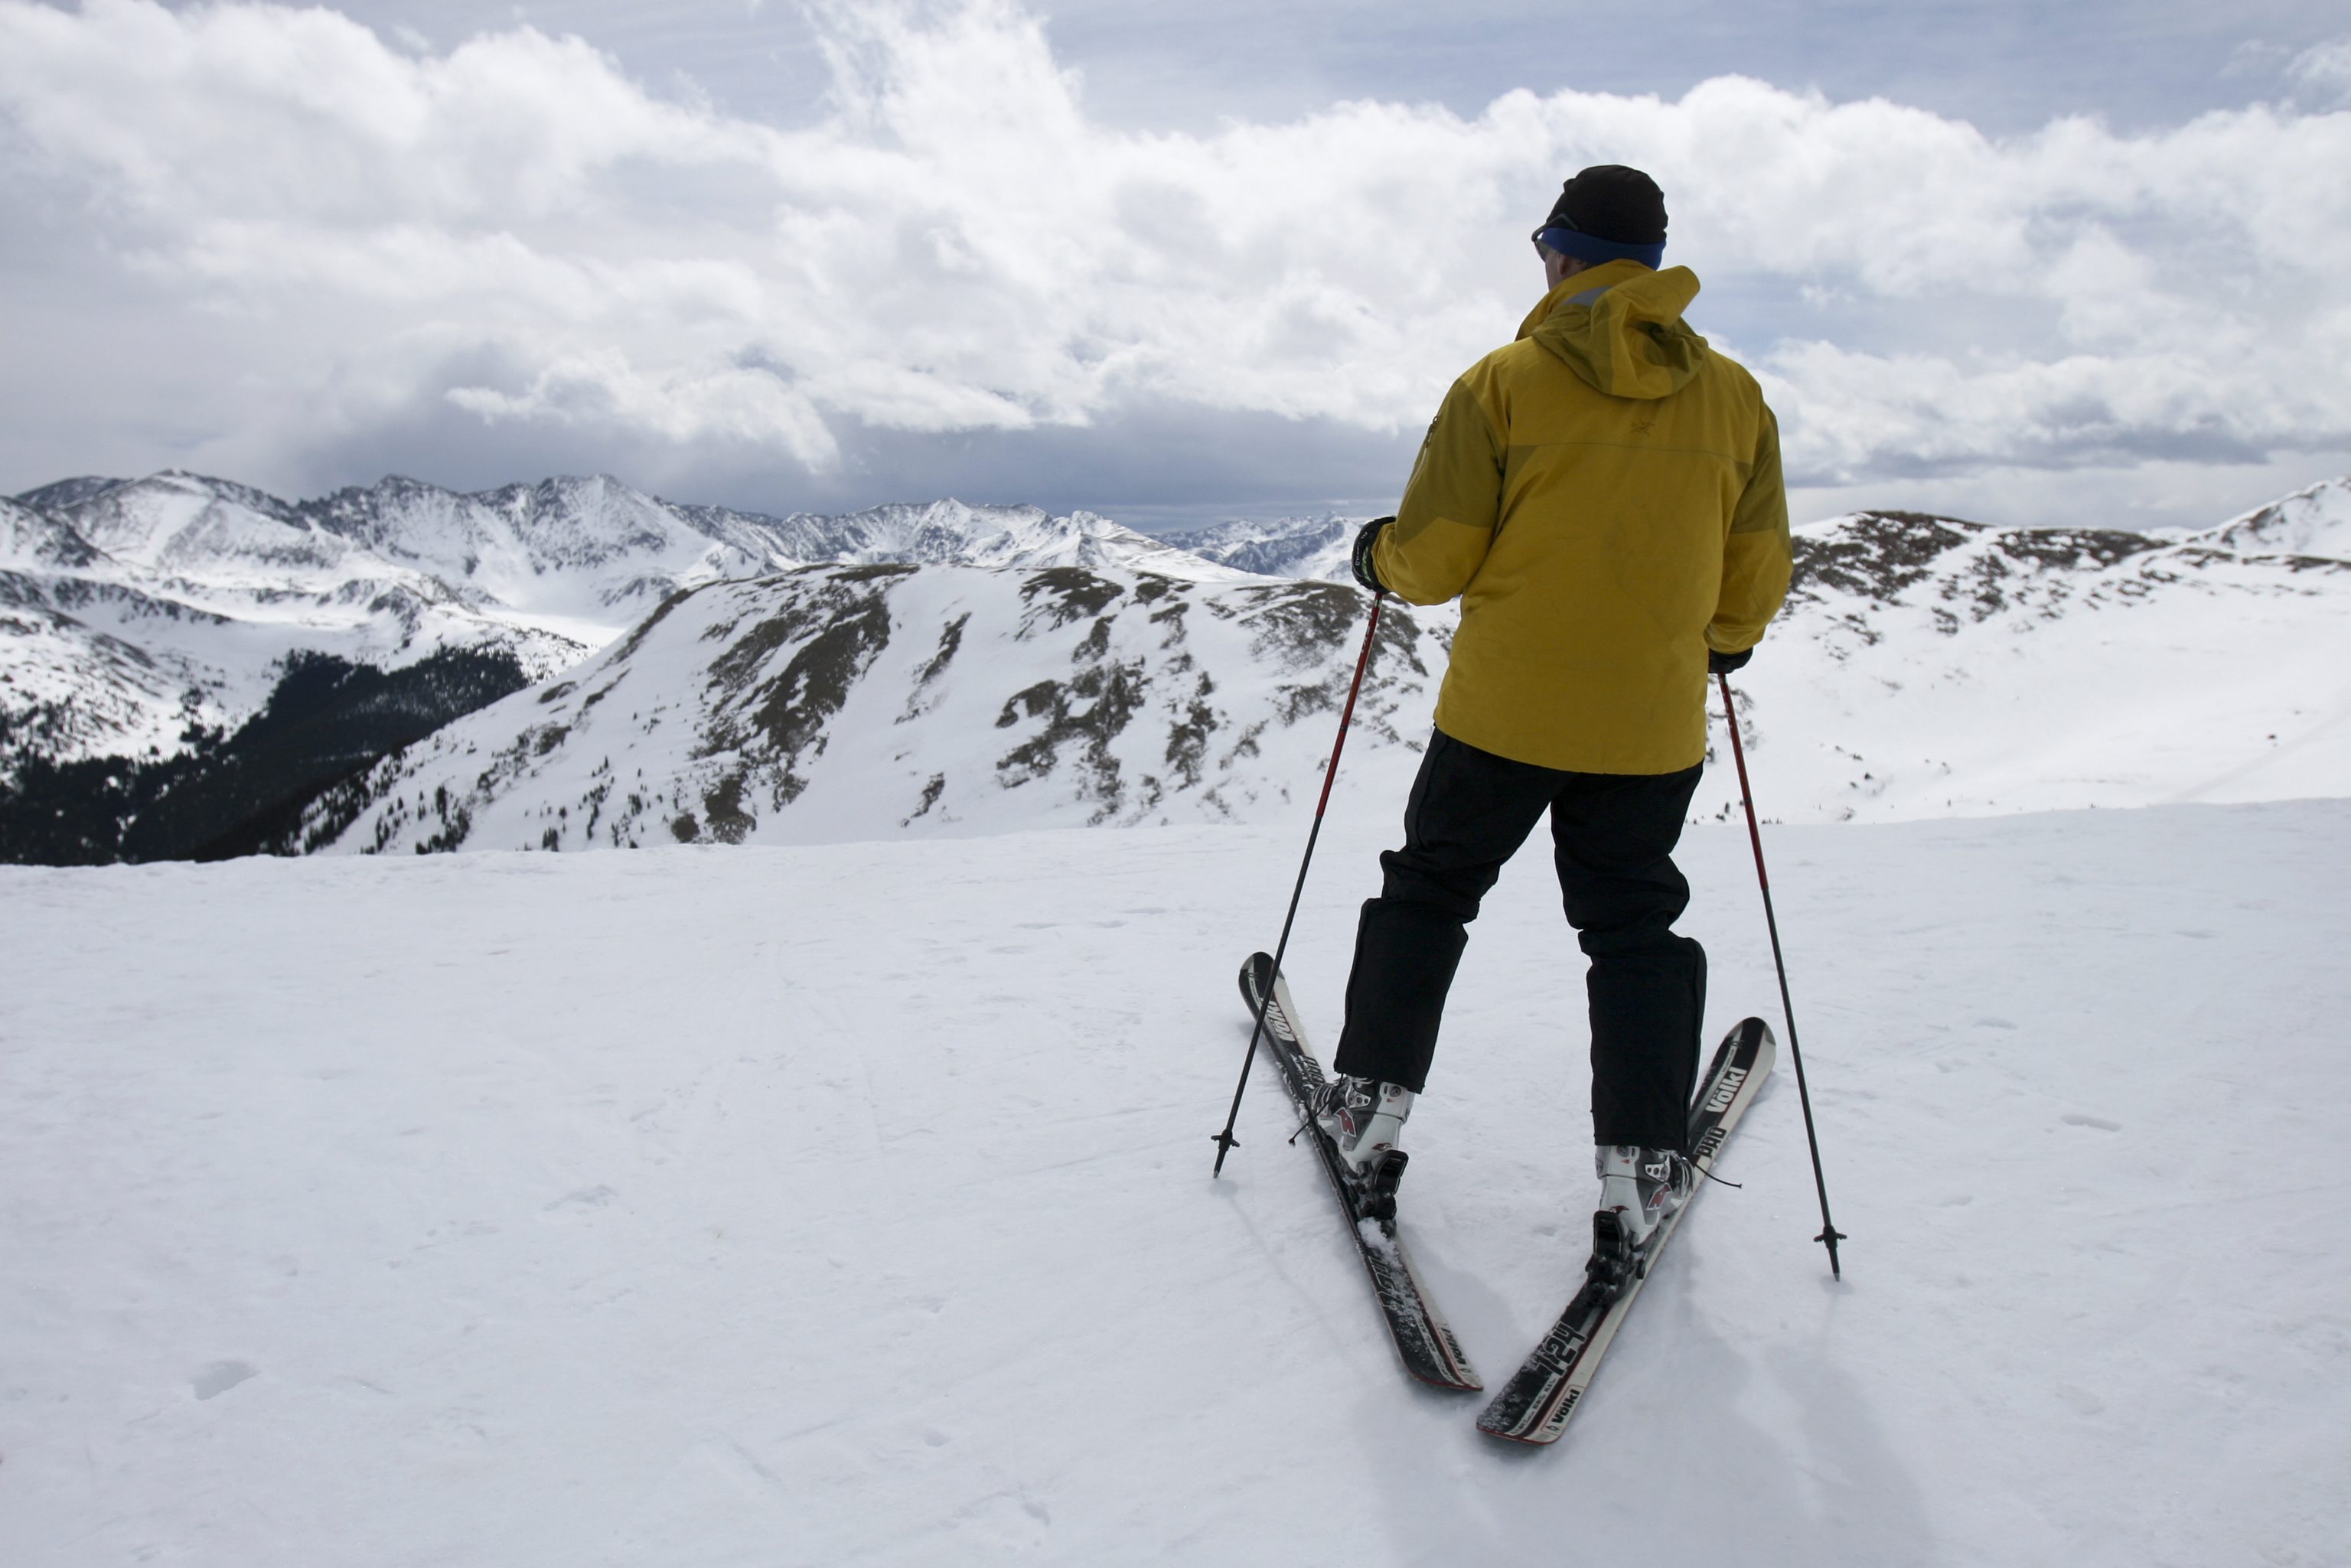 Tips To Prepare For High Altitude Skiing In The Rocky Mountain Peaks